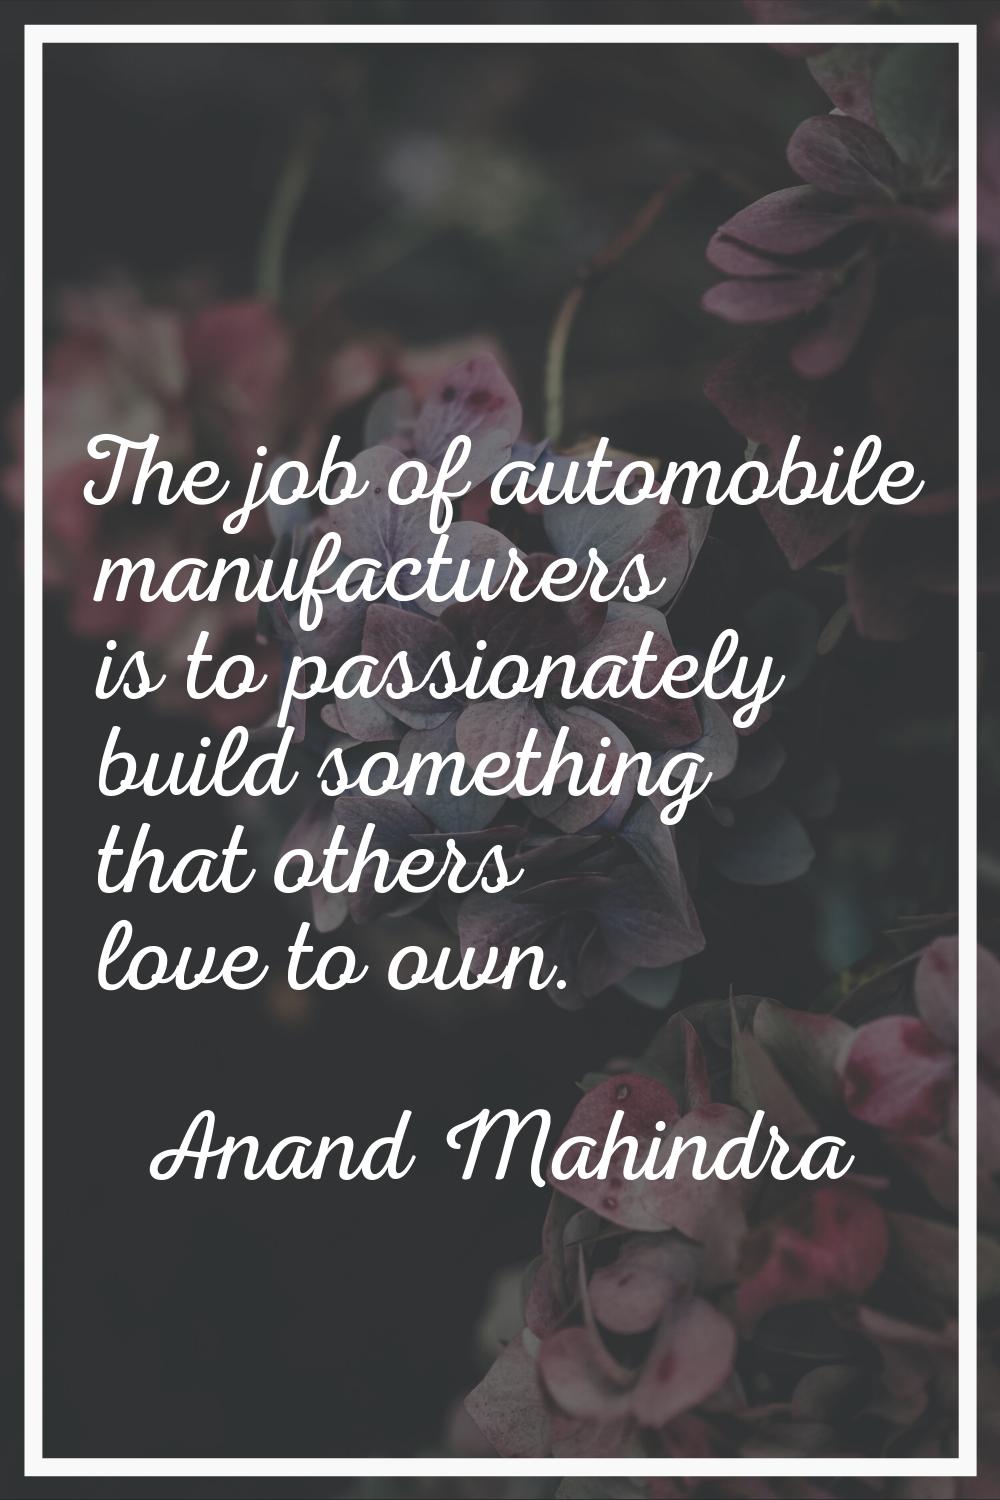 The job of automobile manufacturers is to passionately build something that others love to own.